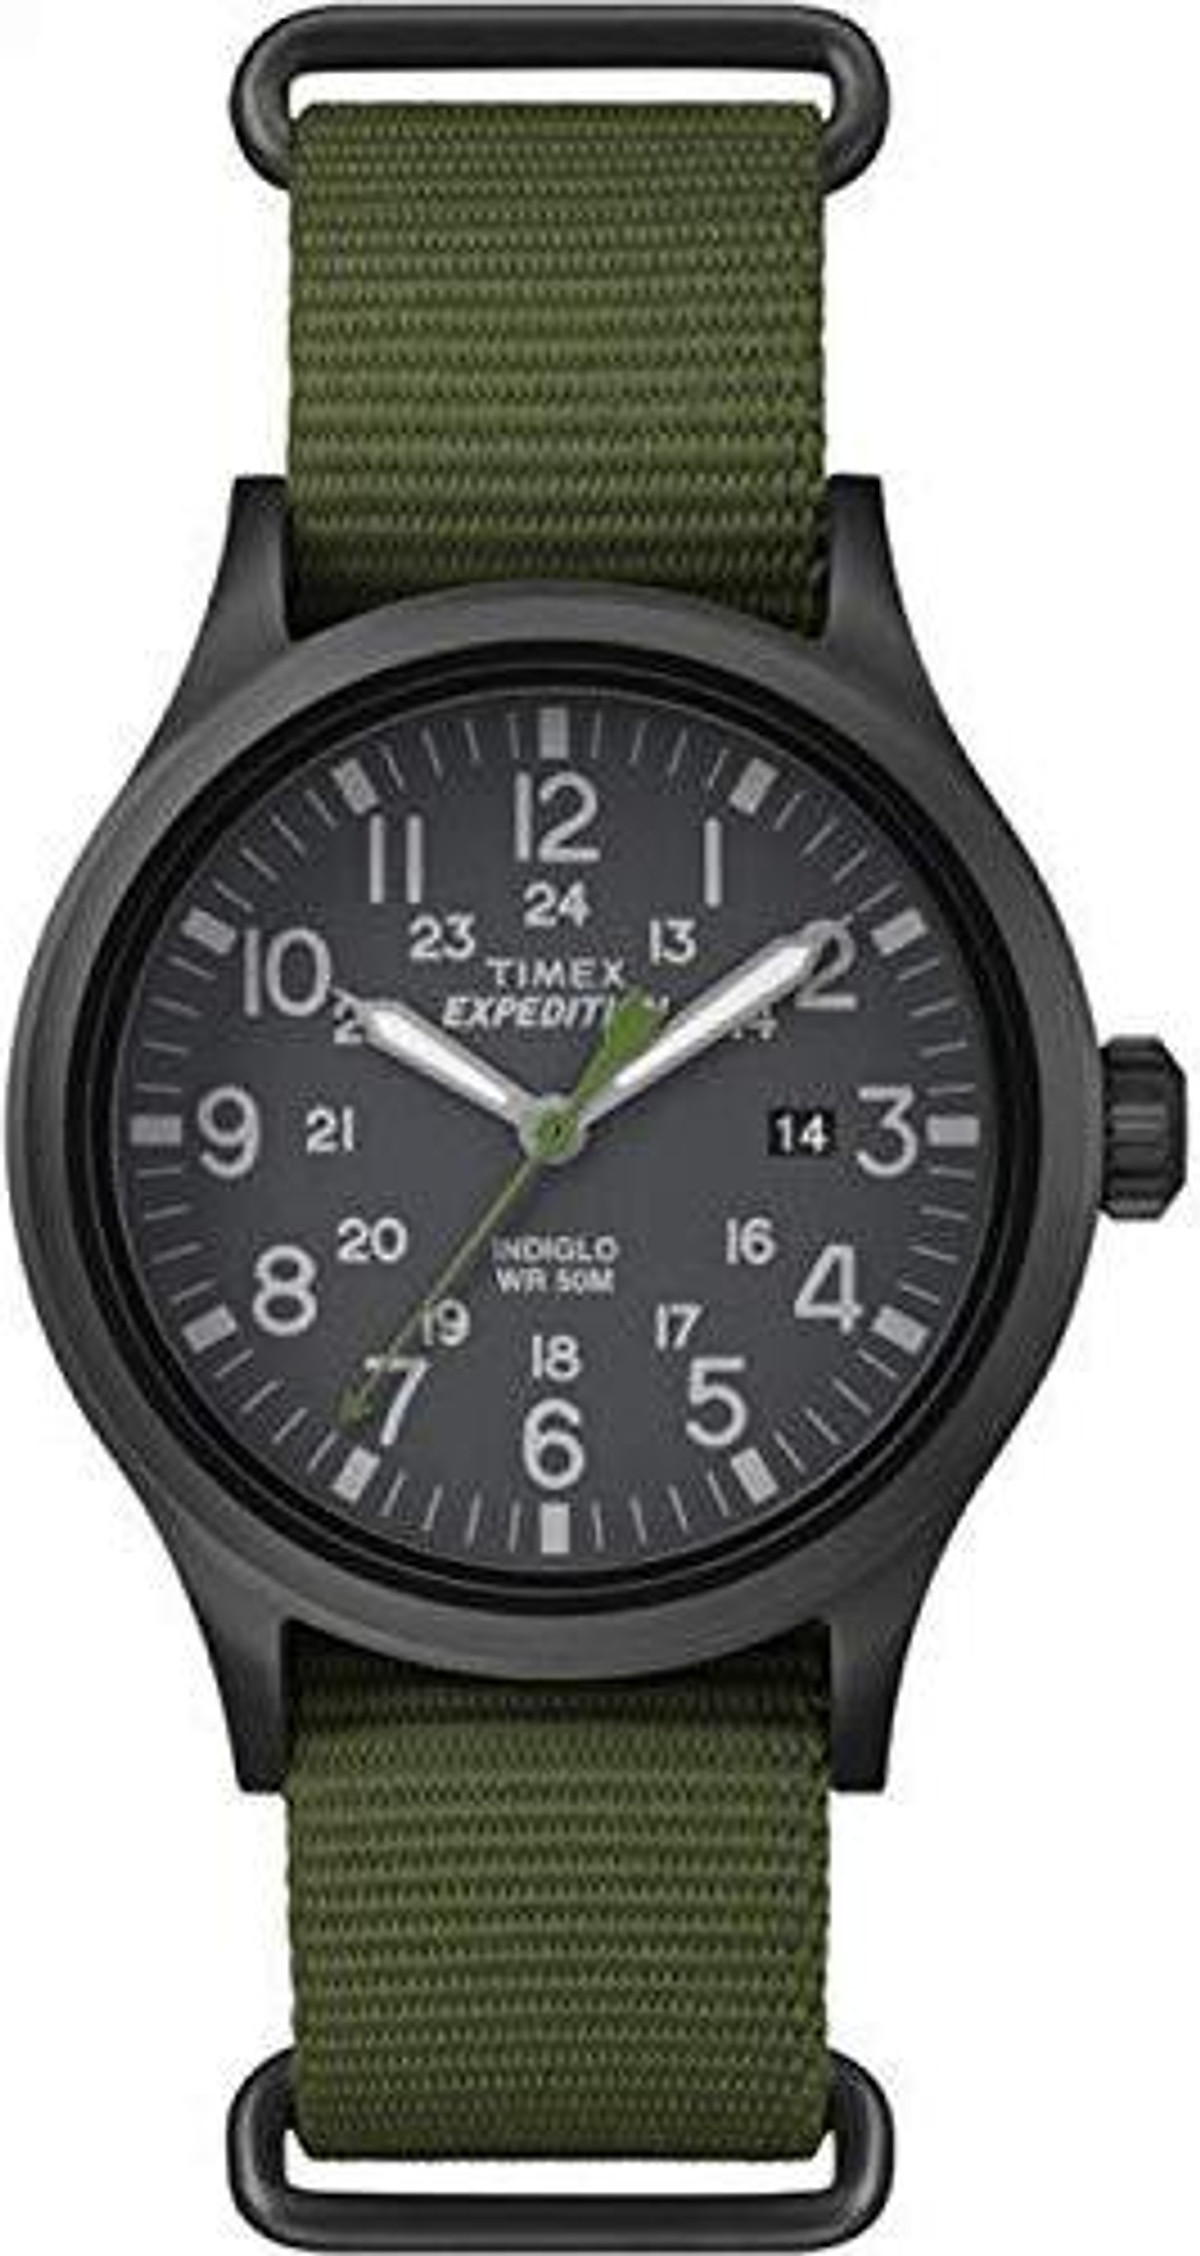 Top 99+ imagen timex expidition scout